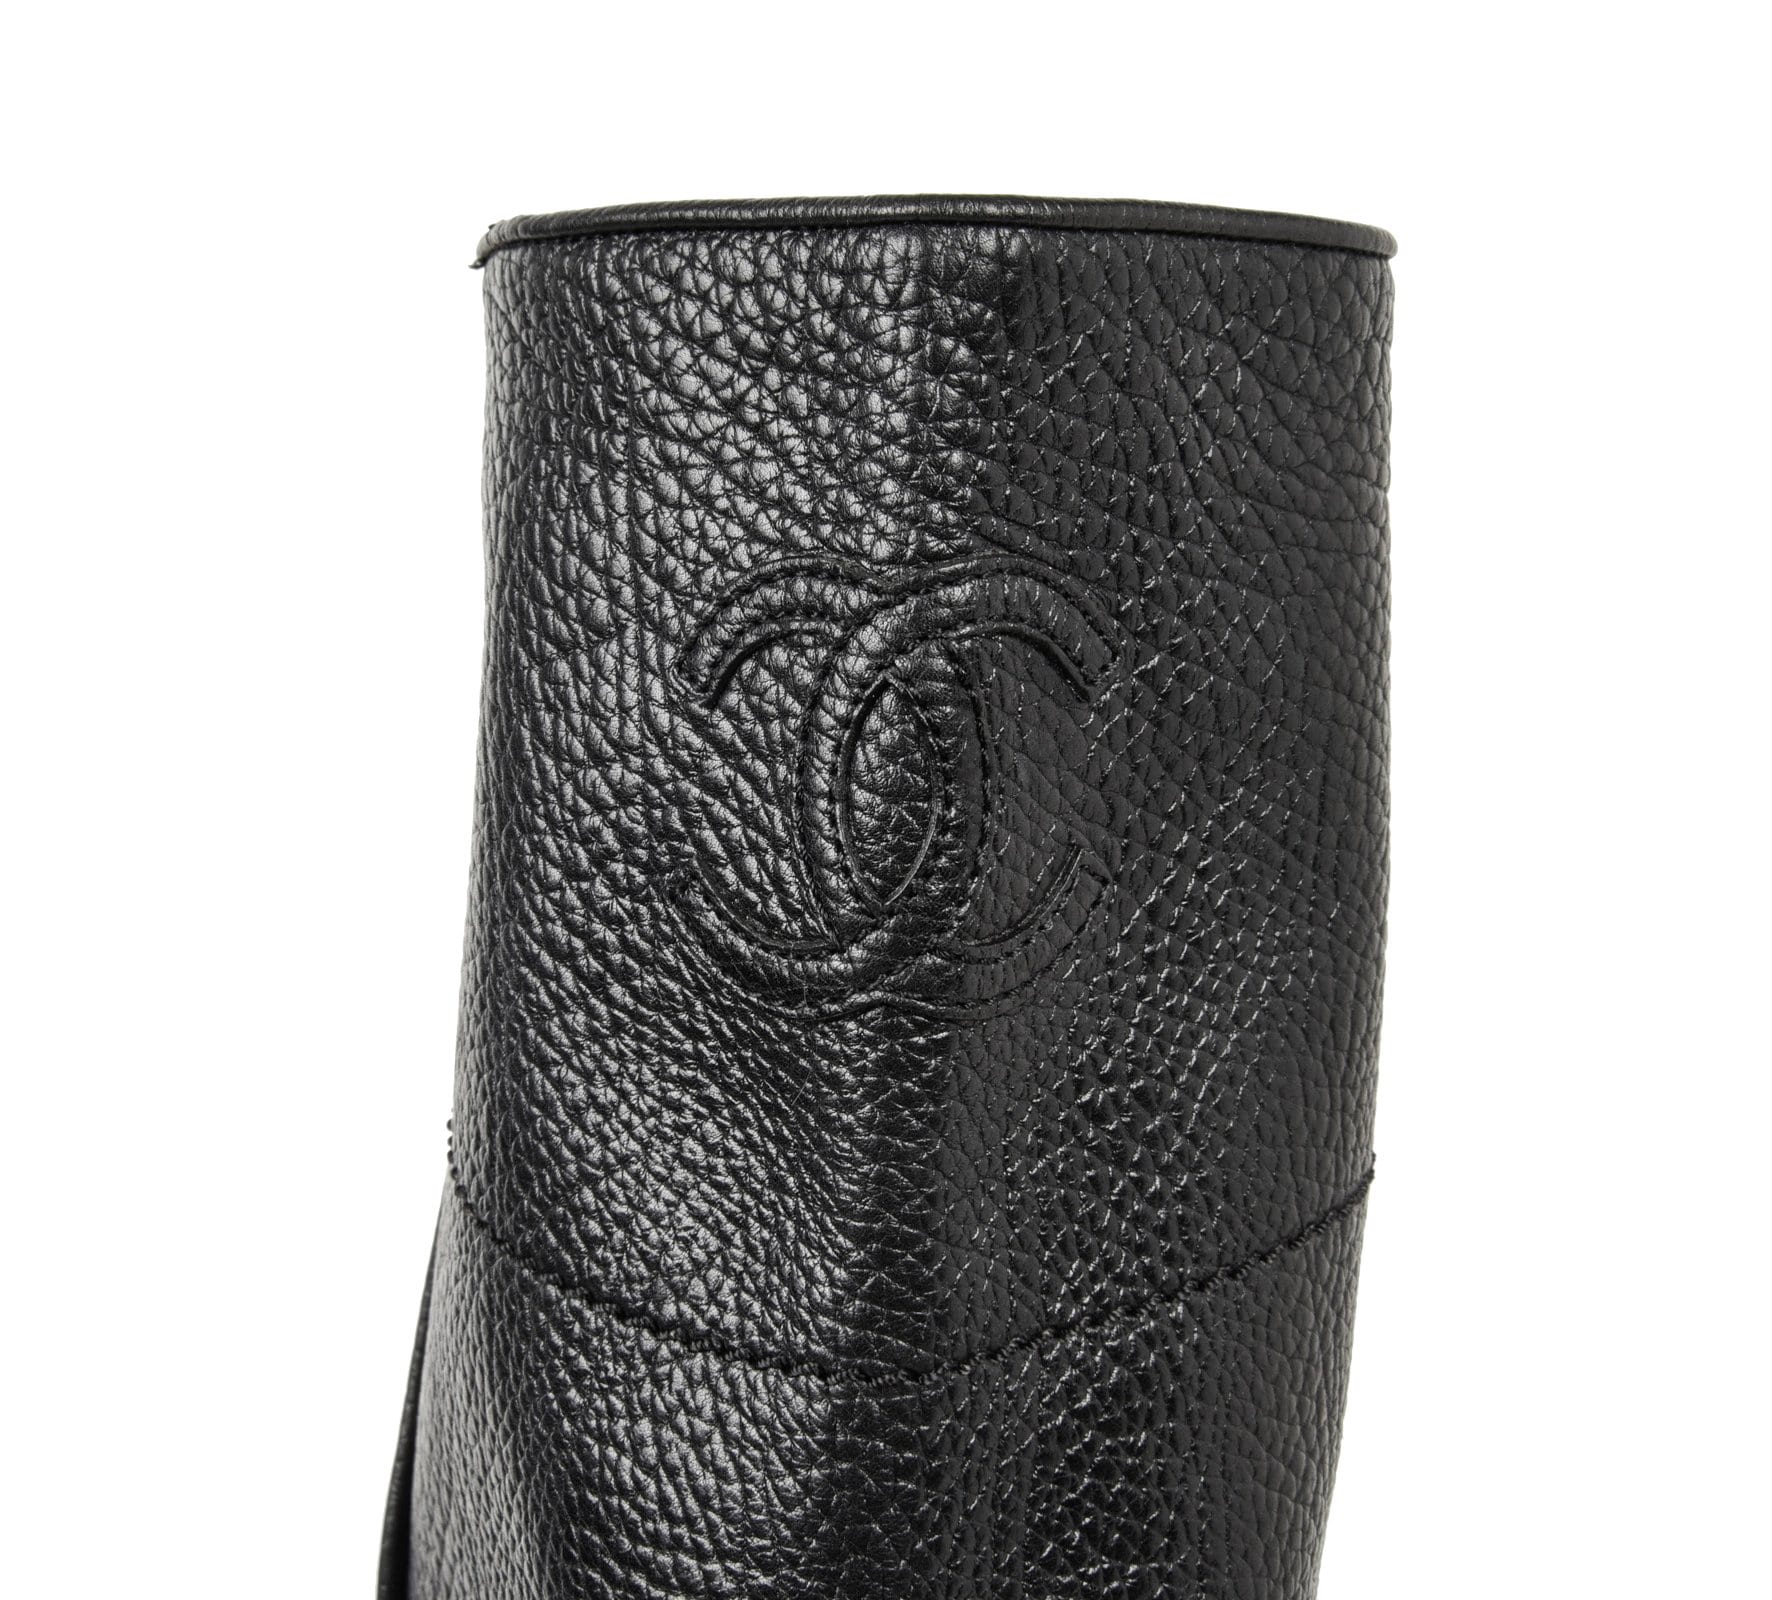 Chanel Boot Black Textured Leather Flat Knee High CC Logo 39.5